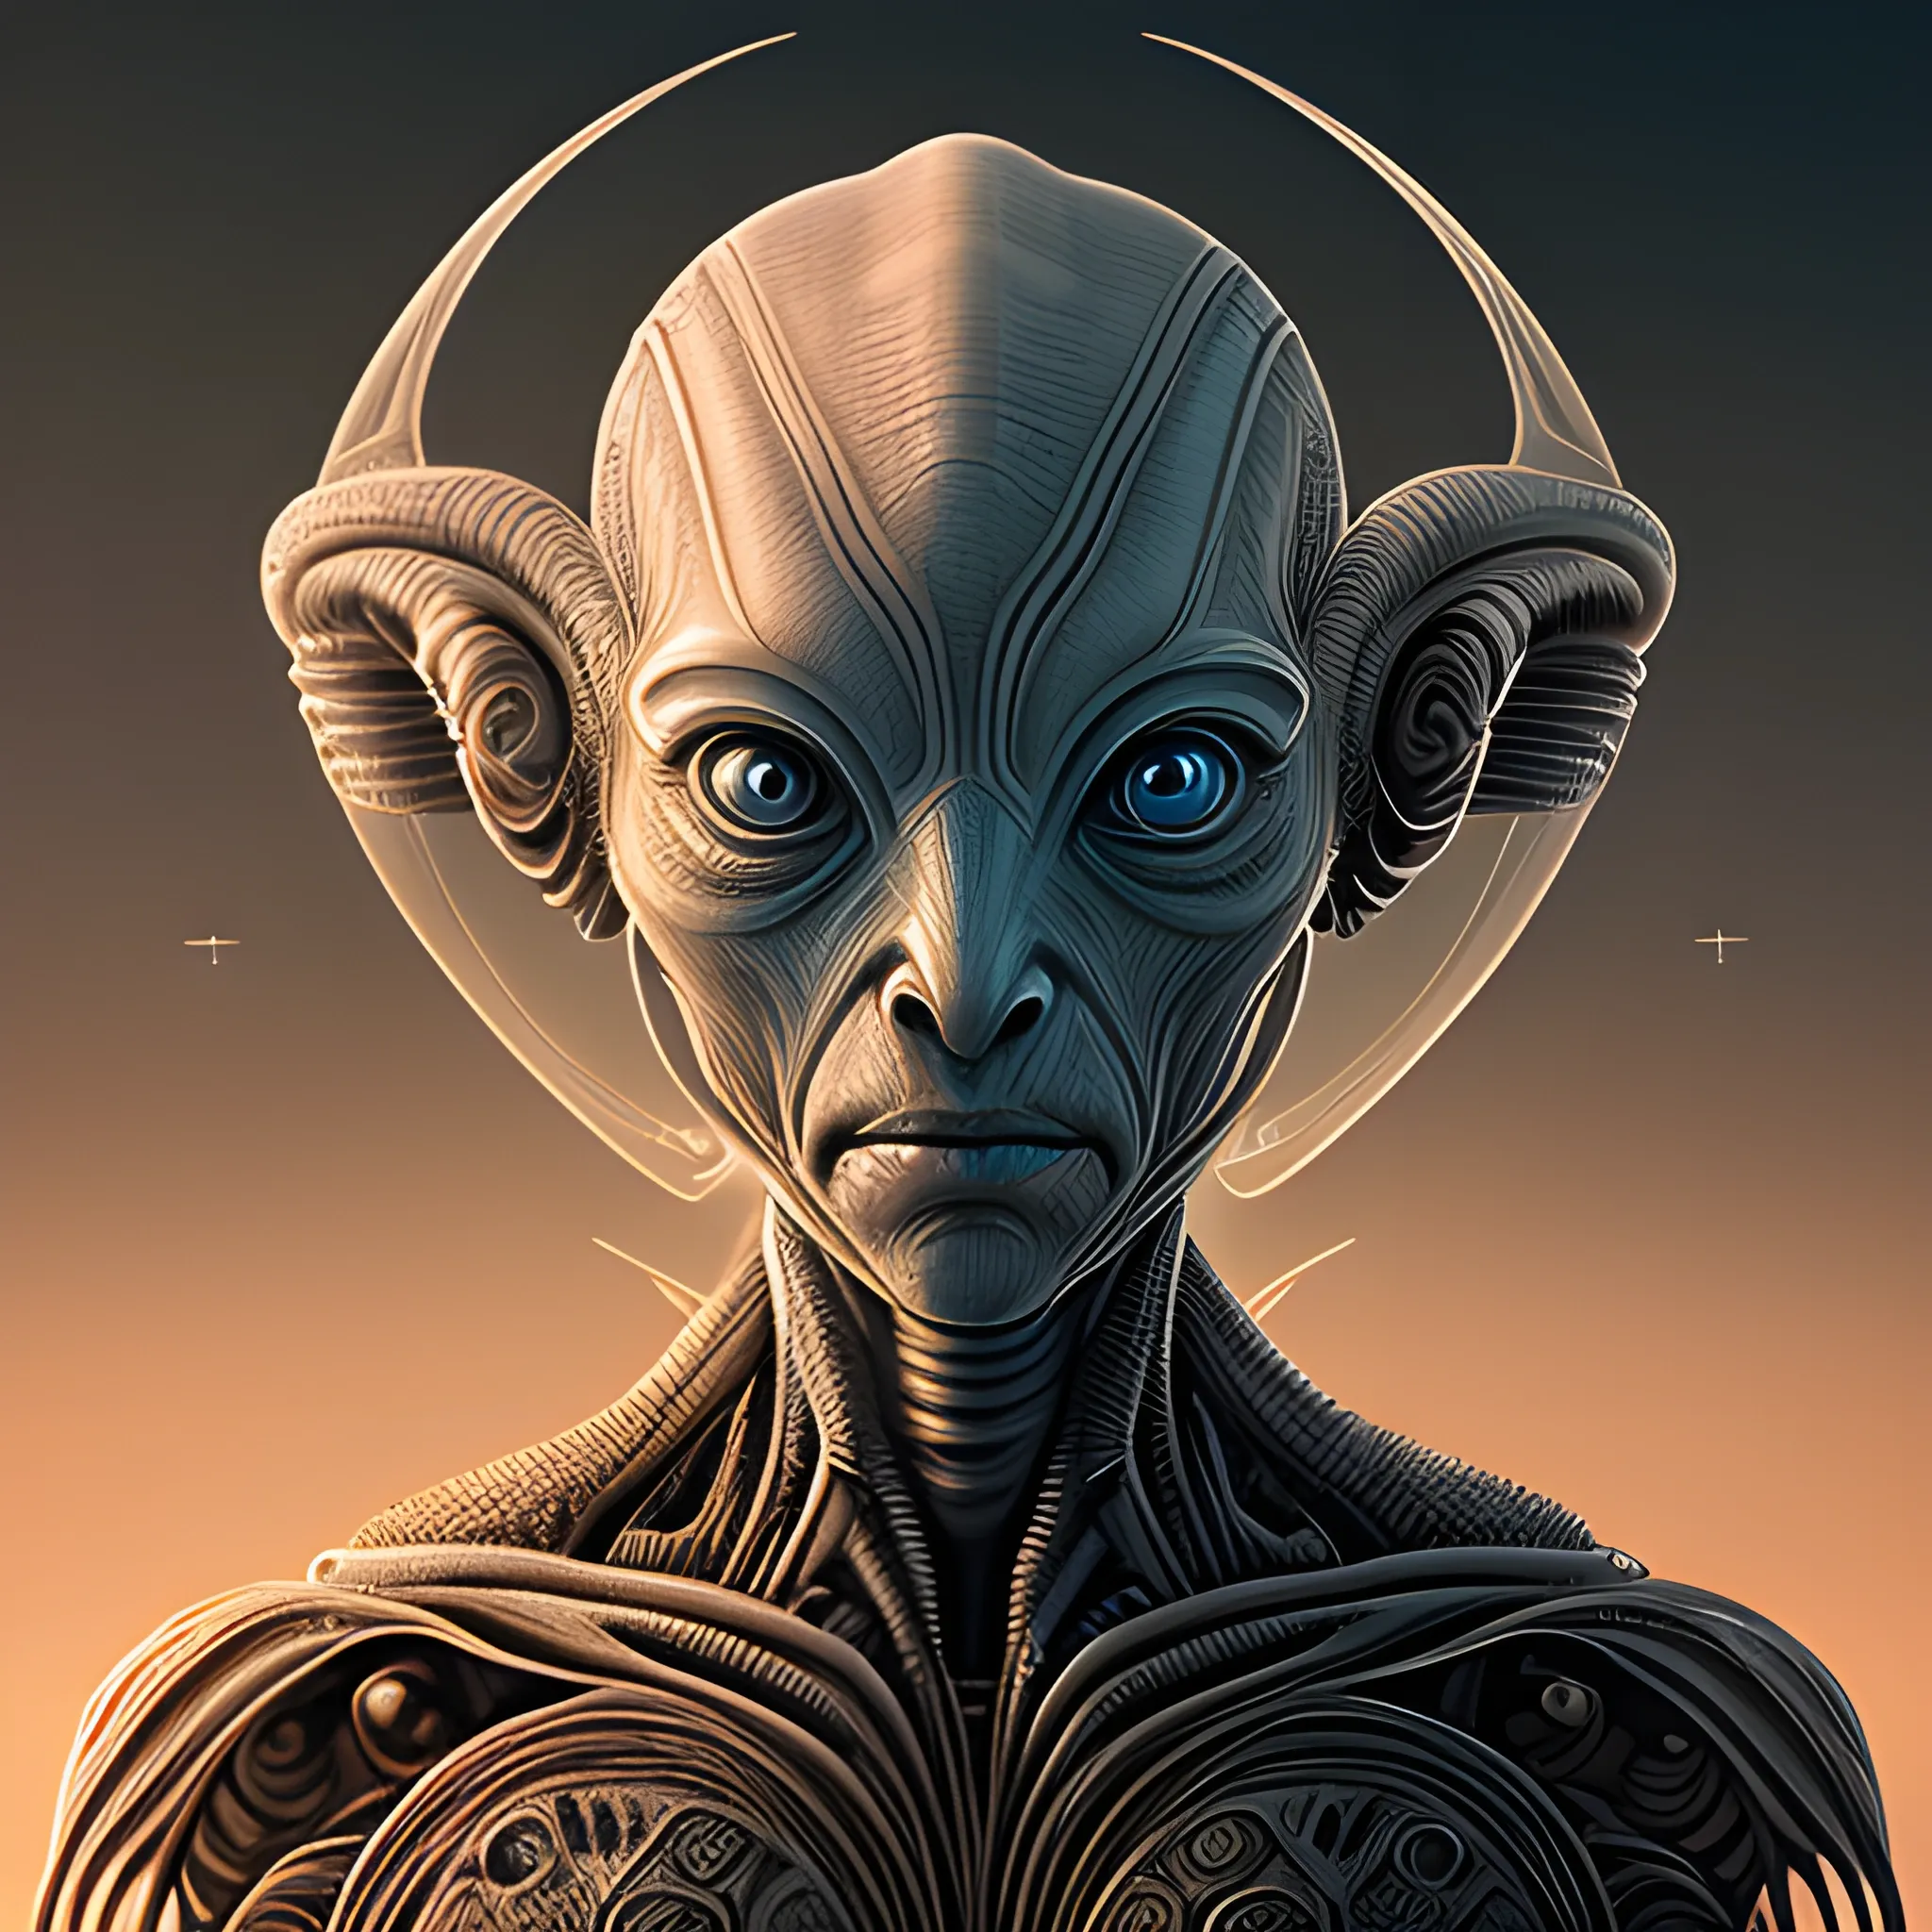 A detailed and intricate digital art piece in a cinematic style, this ultra high resolution portrait of an organic star wars-like alien is a true masterpiece